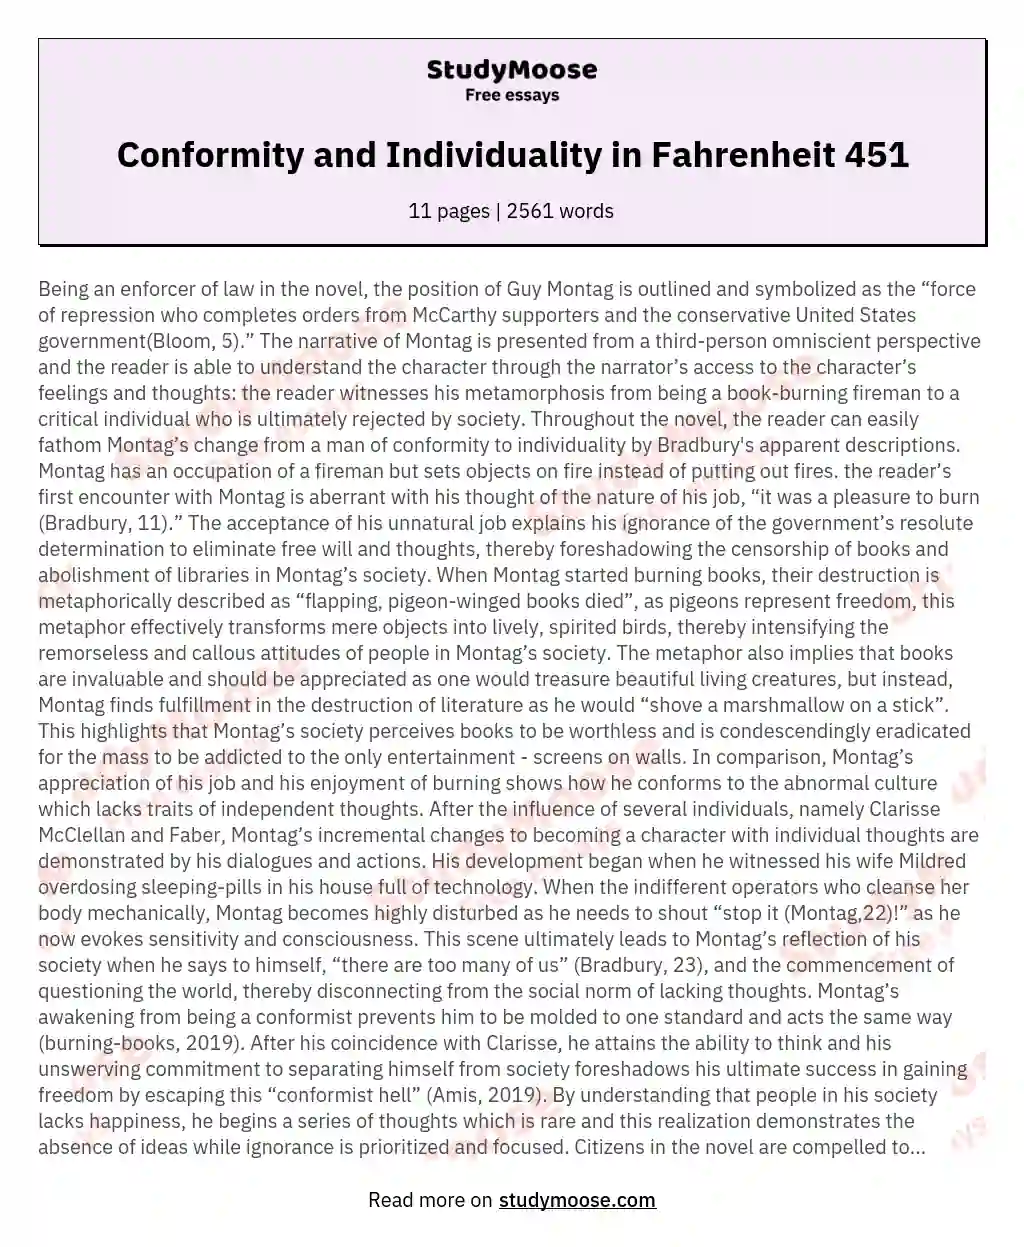 Conformity and Individuality in Fahrenheit 451